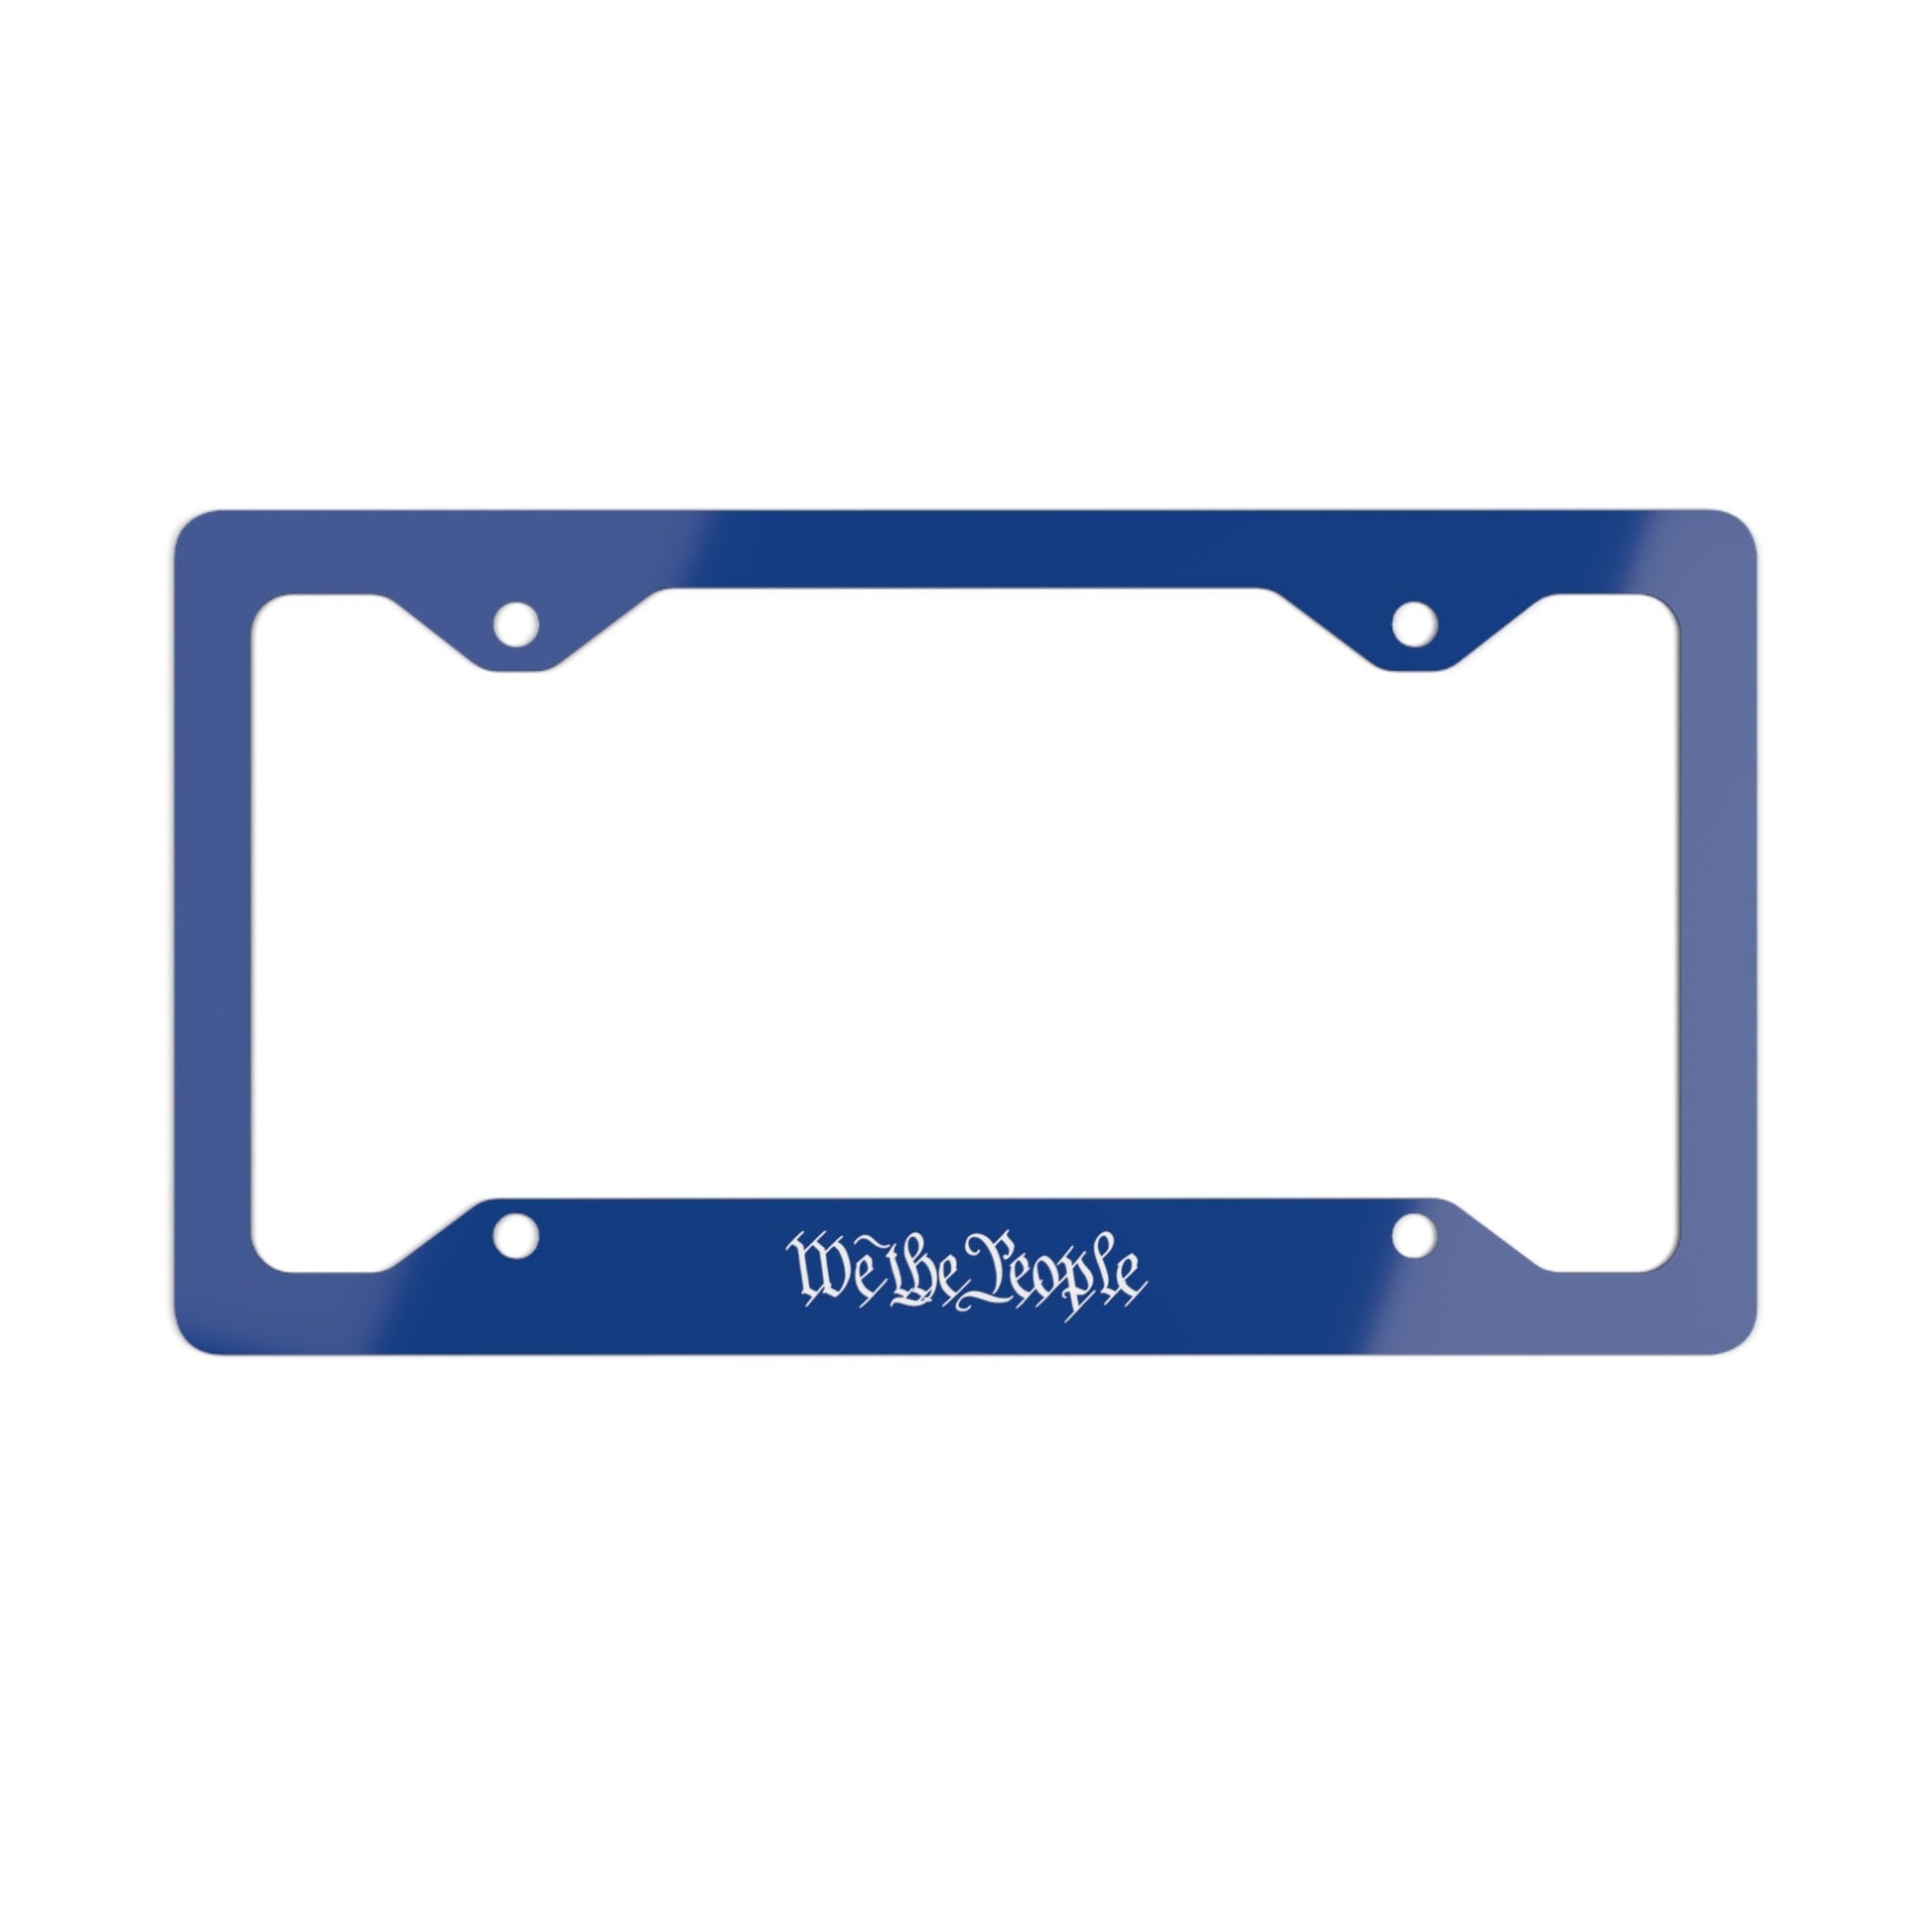 We the Plate People by Revival Blue Metal License Plate Frame, Automotive Accessories, New Car and Truck Accessories, We the People